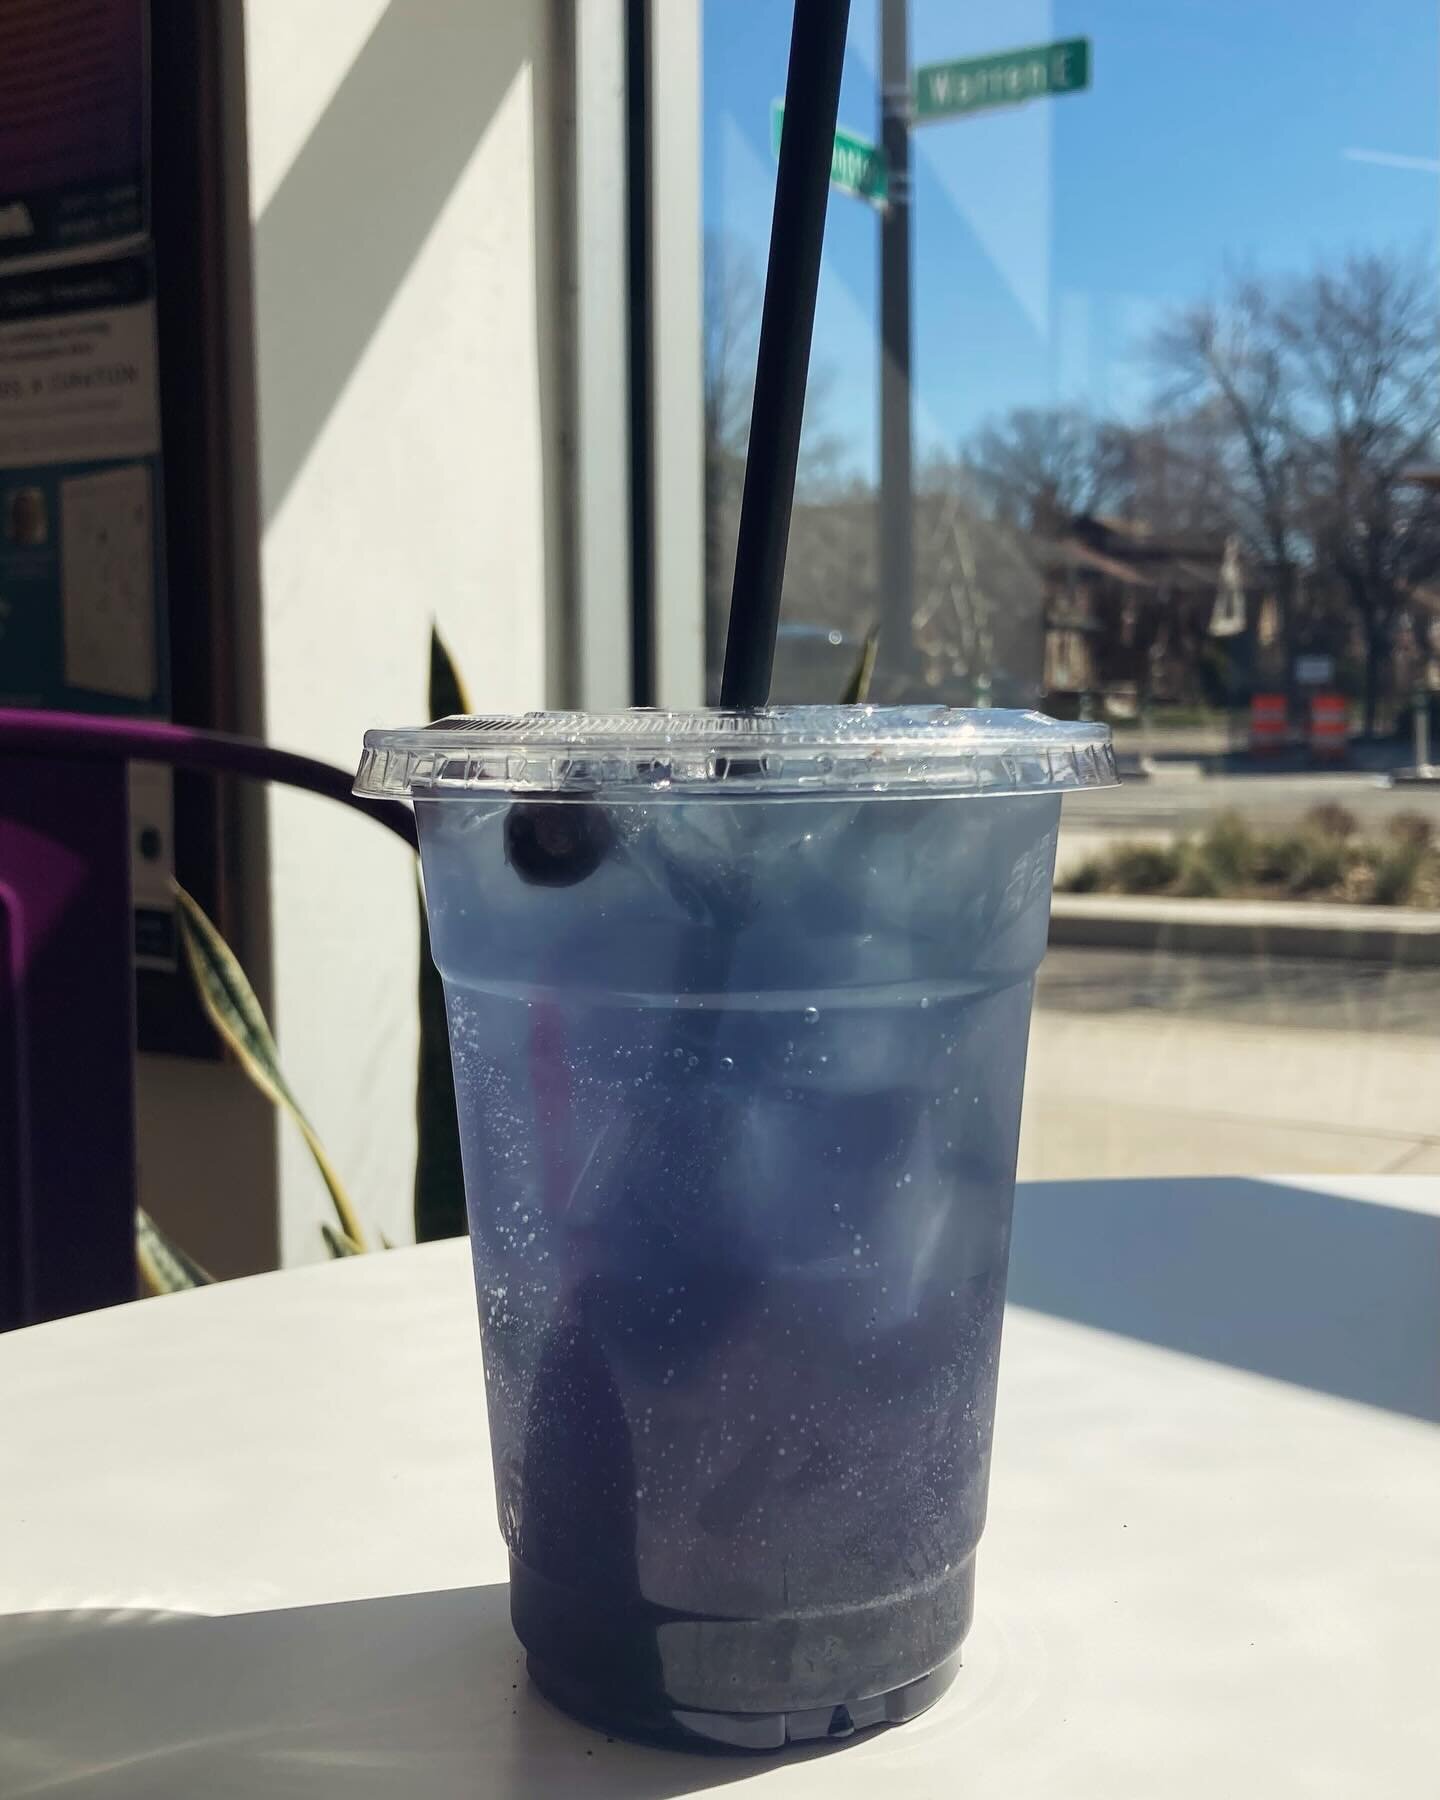 ✨The Birdie!✨

Not a permanent installation, but we got a challenge from @birdiesbookmobile to make a Birdie-inspired drink 😇

Come thru and try this spin on a blueberry lemonade italian-style soda! Here til it&rsquo;s gone 😋

Here Friday 12-5 and 